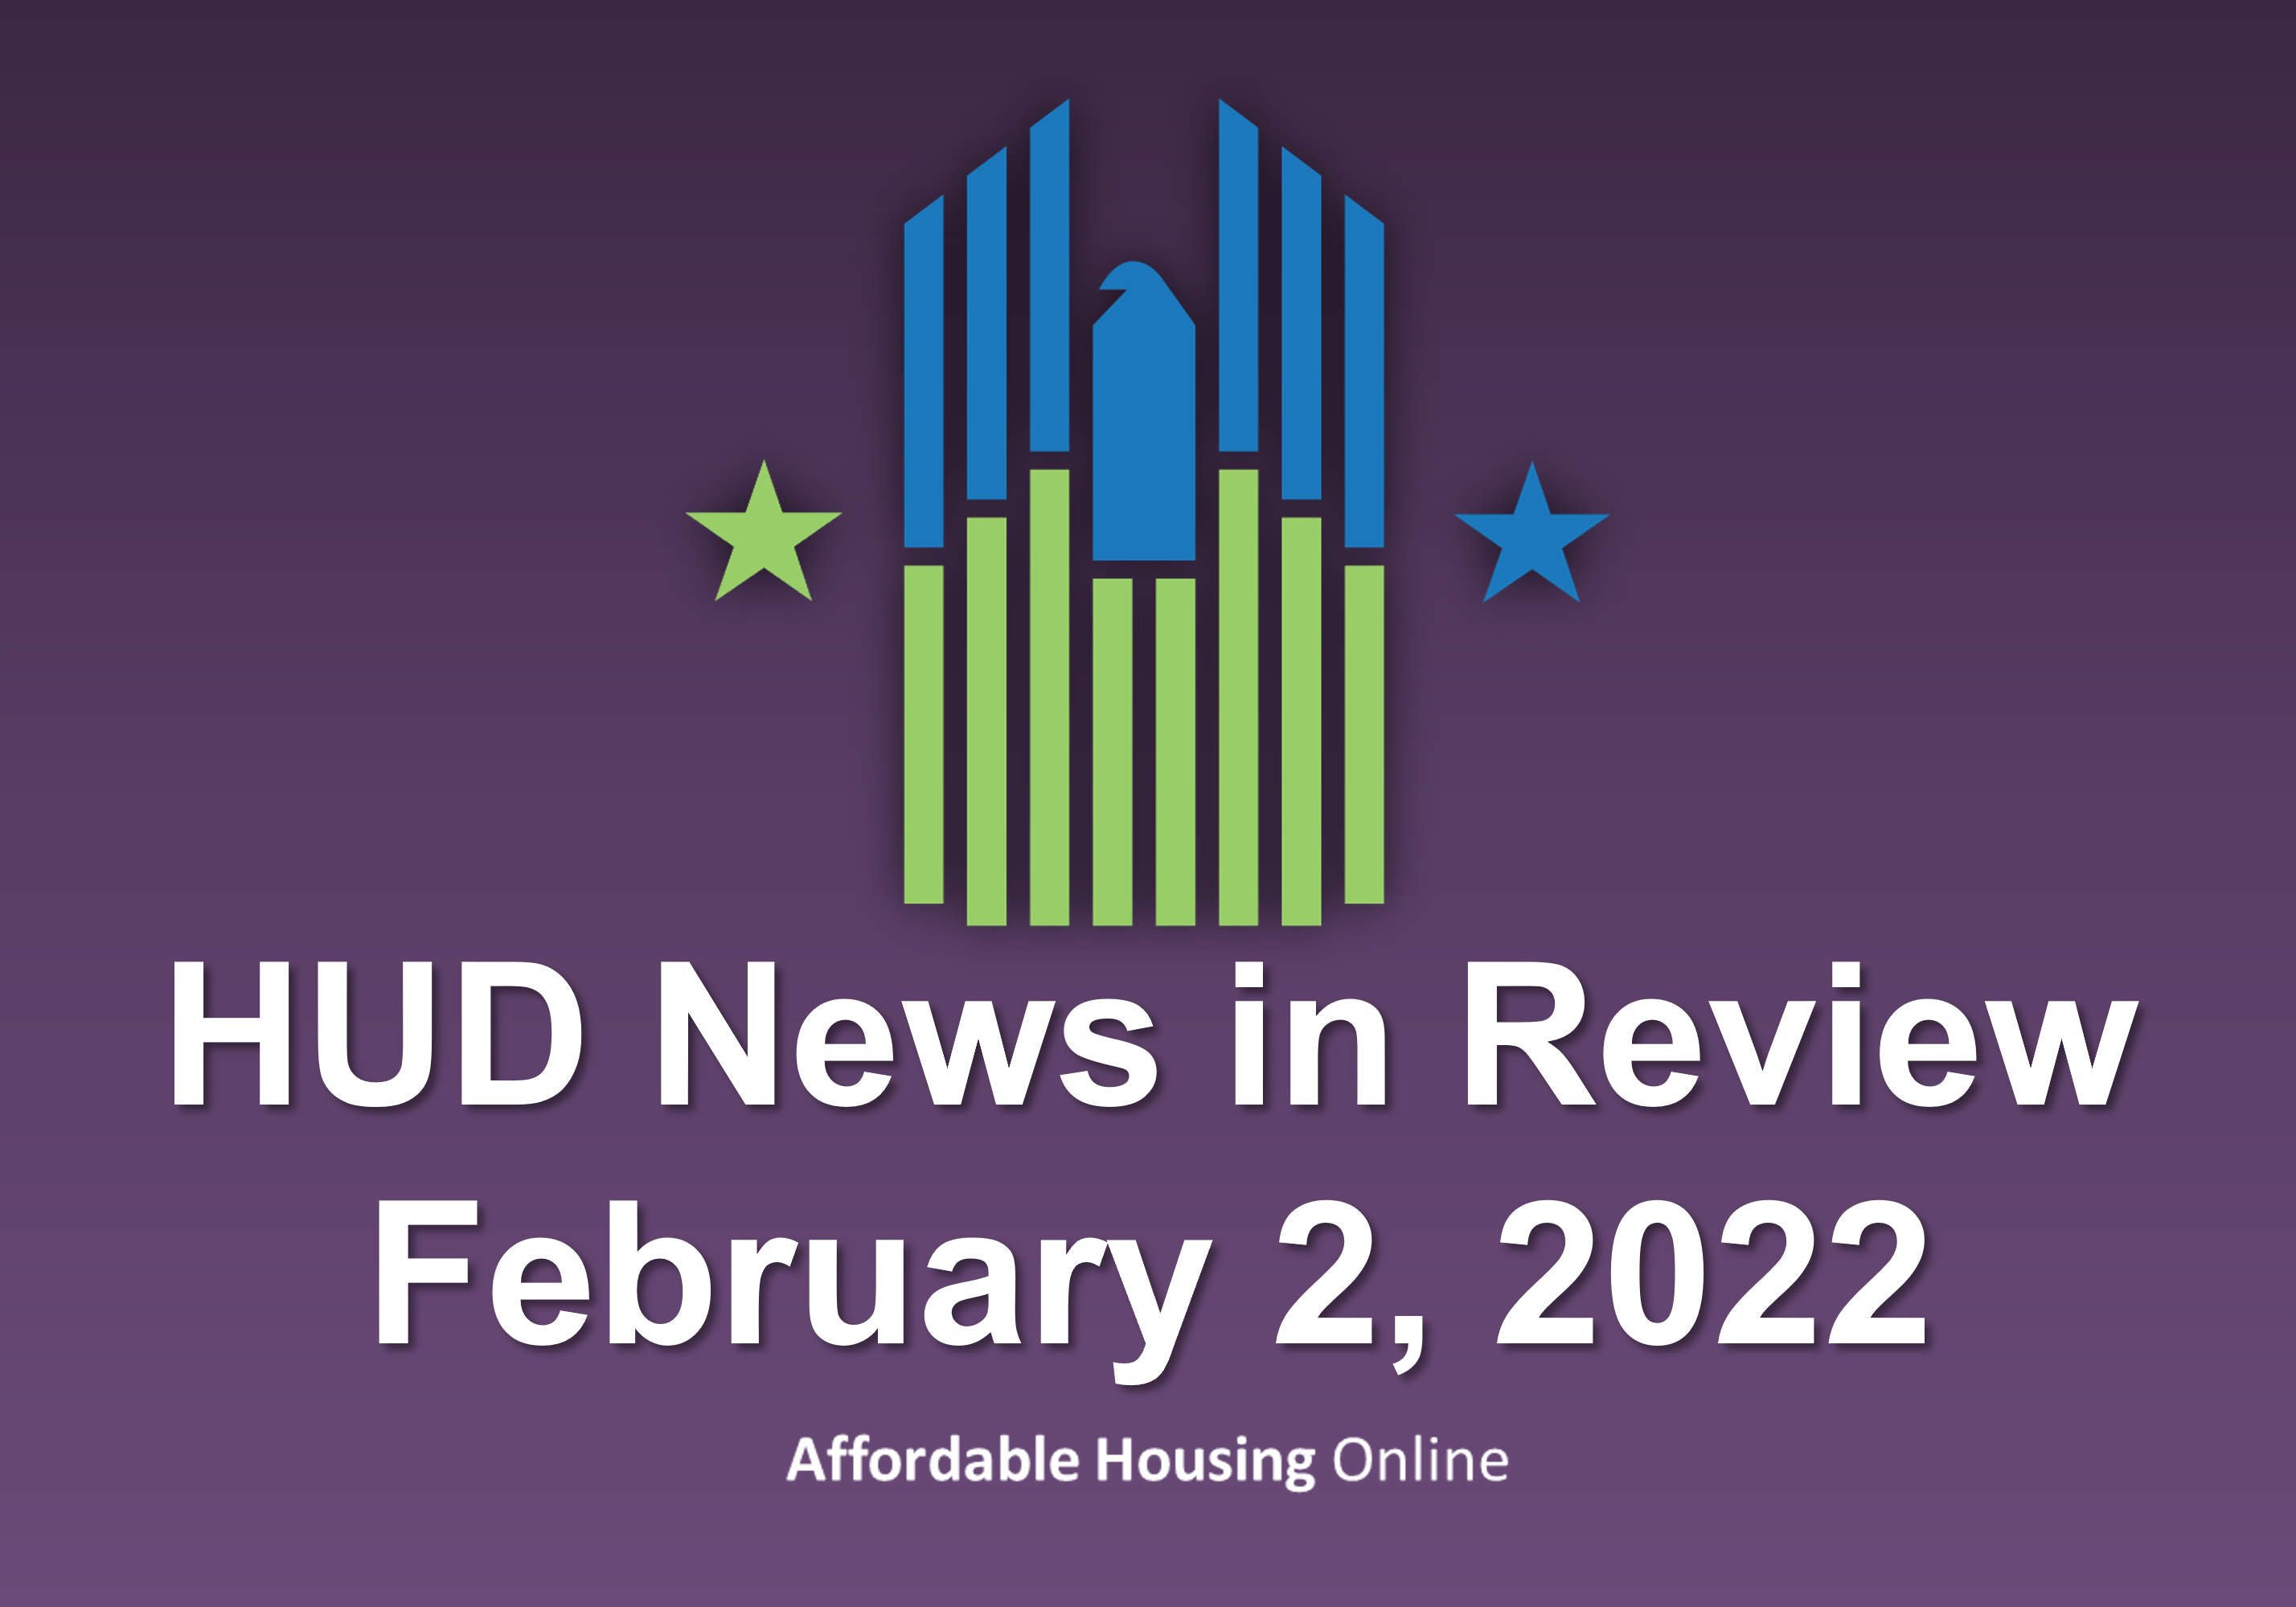 HUD News in Review banner image for February 2, 2022